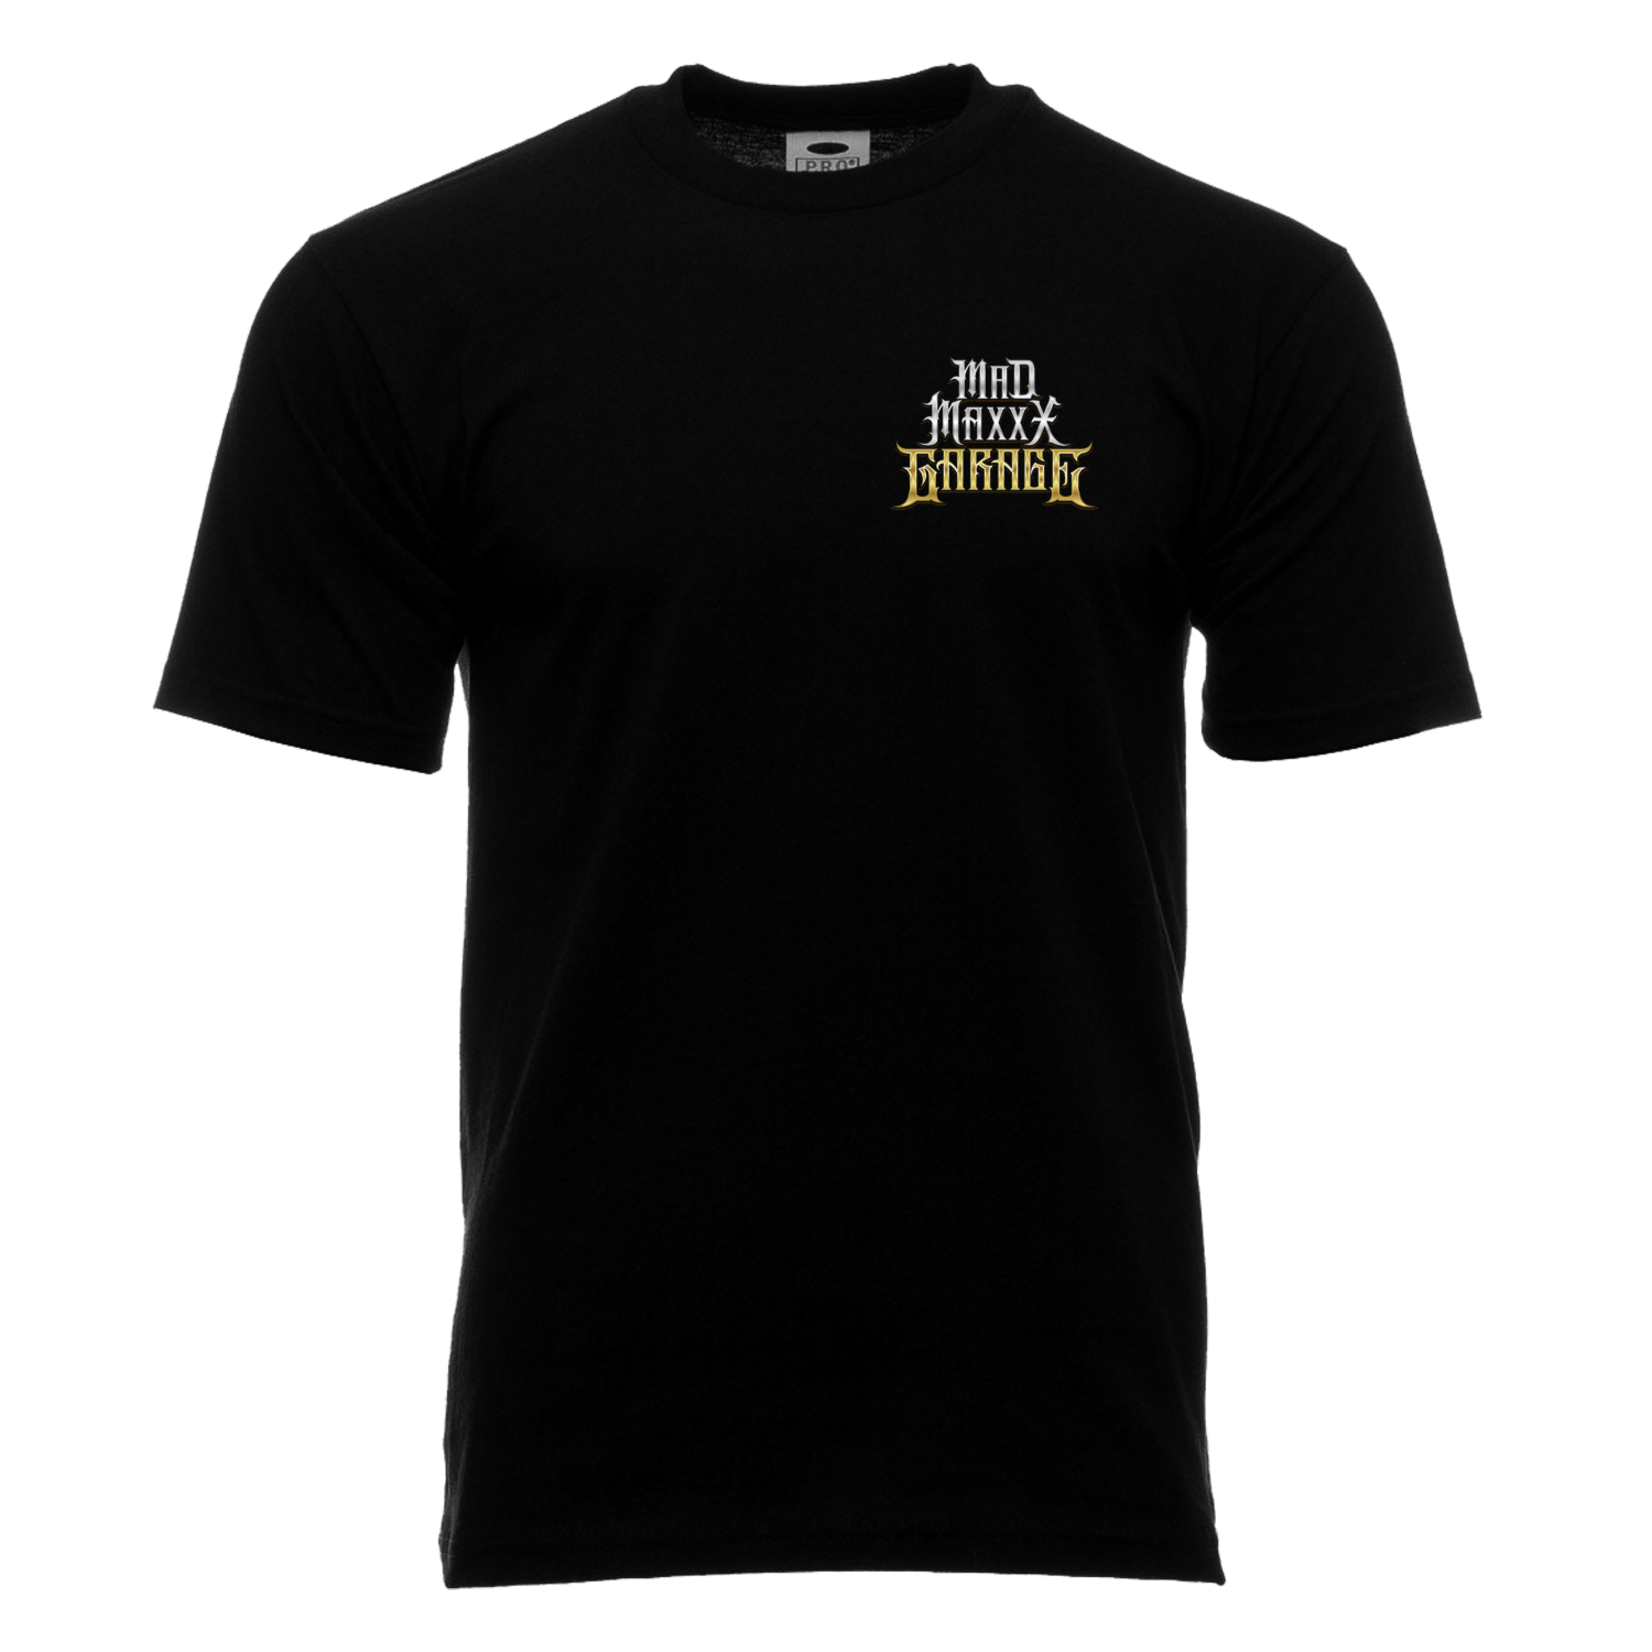 PRO CLUB MMG SUPPORT THOSE SHORT SLEEVE T-SHIRT